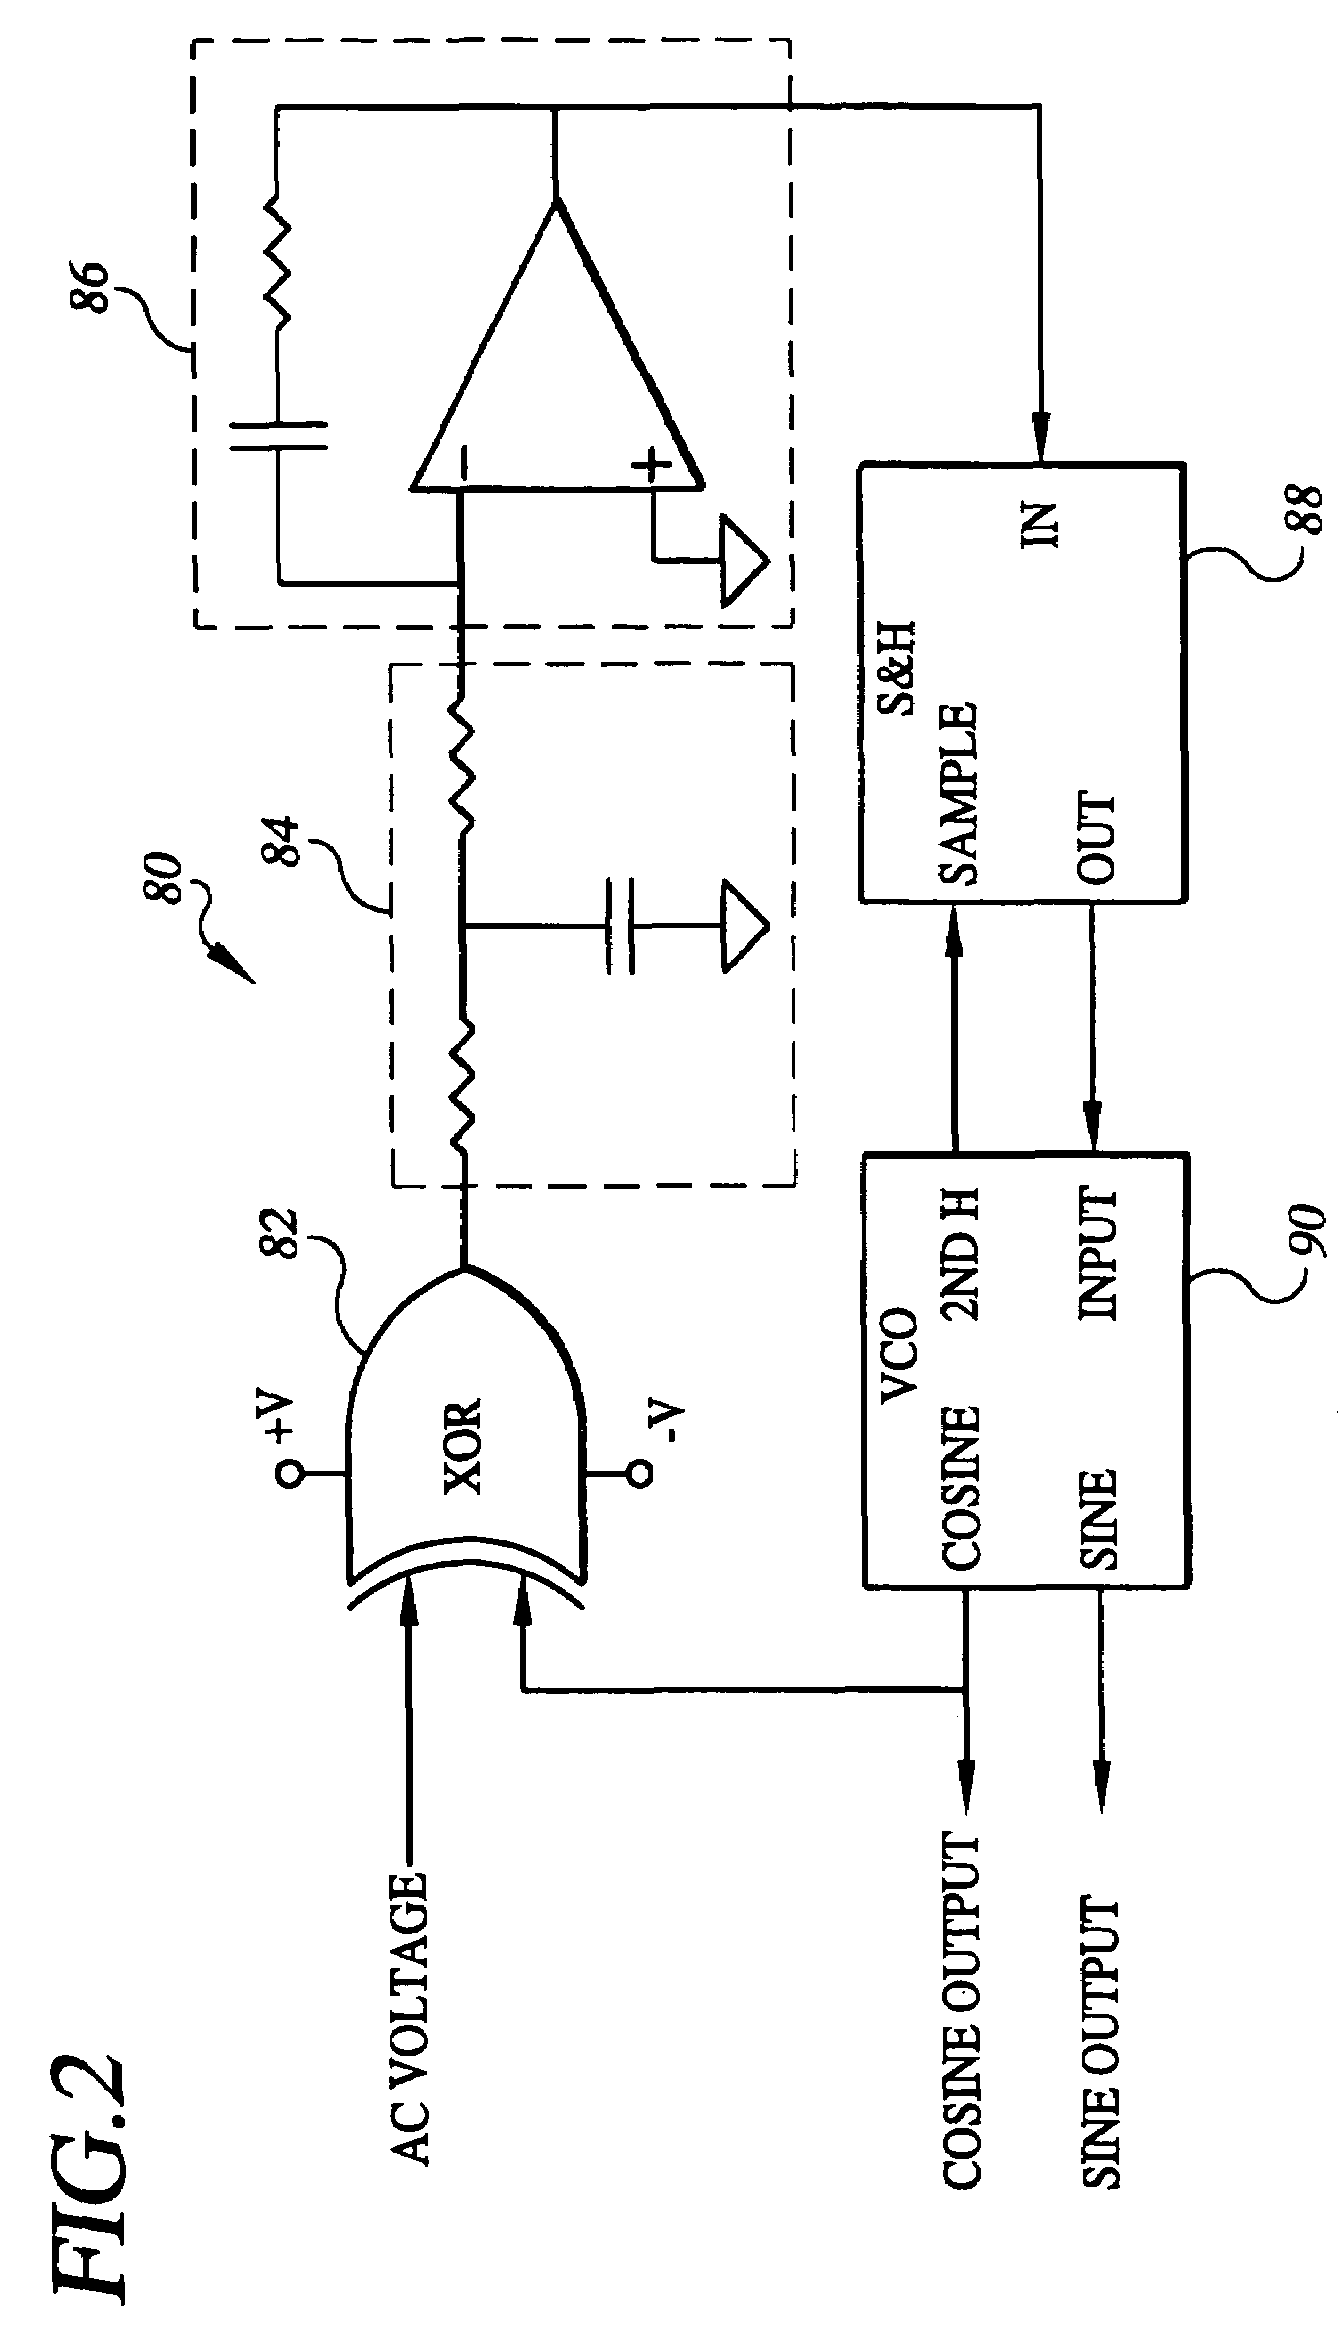 Parallel-connected inverters with separate controllers having impedance current regulators